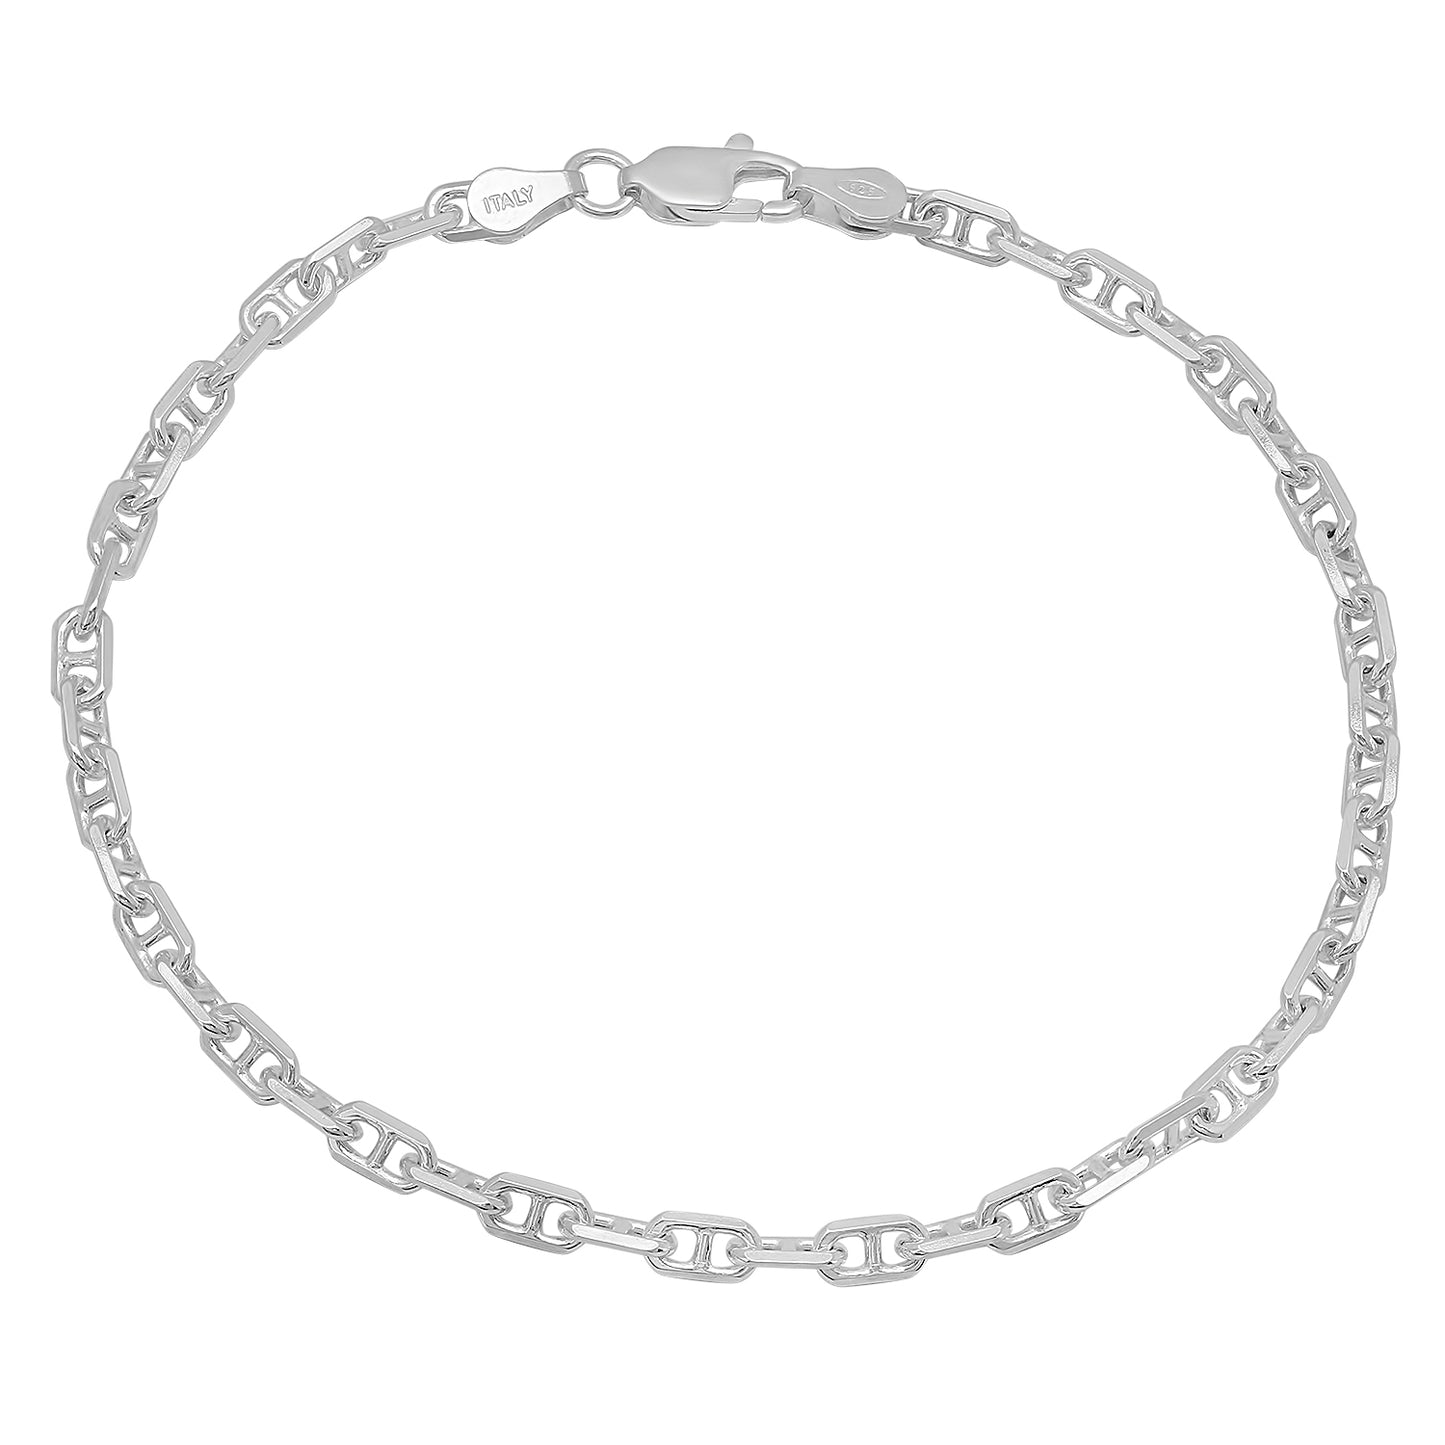 1mm-3mm Solid .925 Sterling Silver Mariner Chain Anklet 7-10" Made in Italy Women's (SKU: MARINER-ANKLETS-GIRLS)